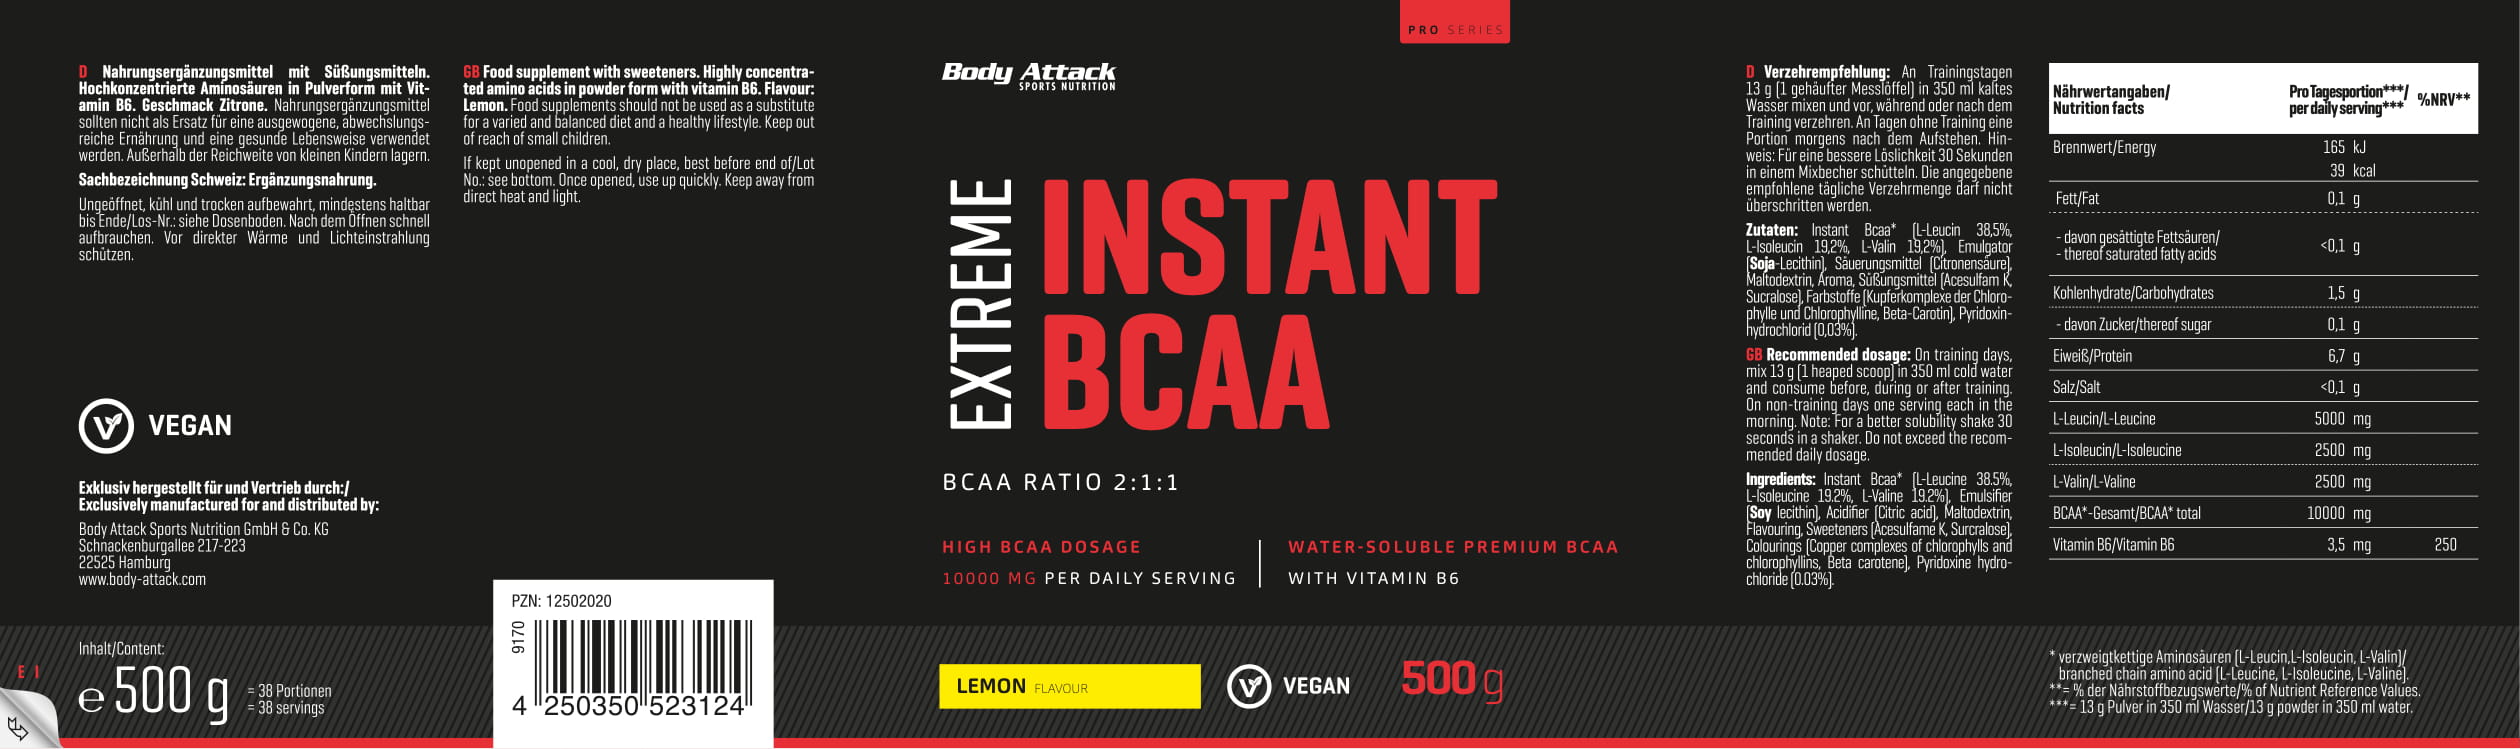 Body Attack Extreme Instant BCAA (500g Dose)